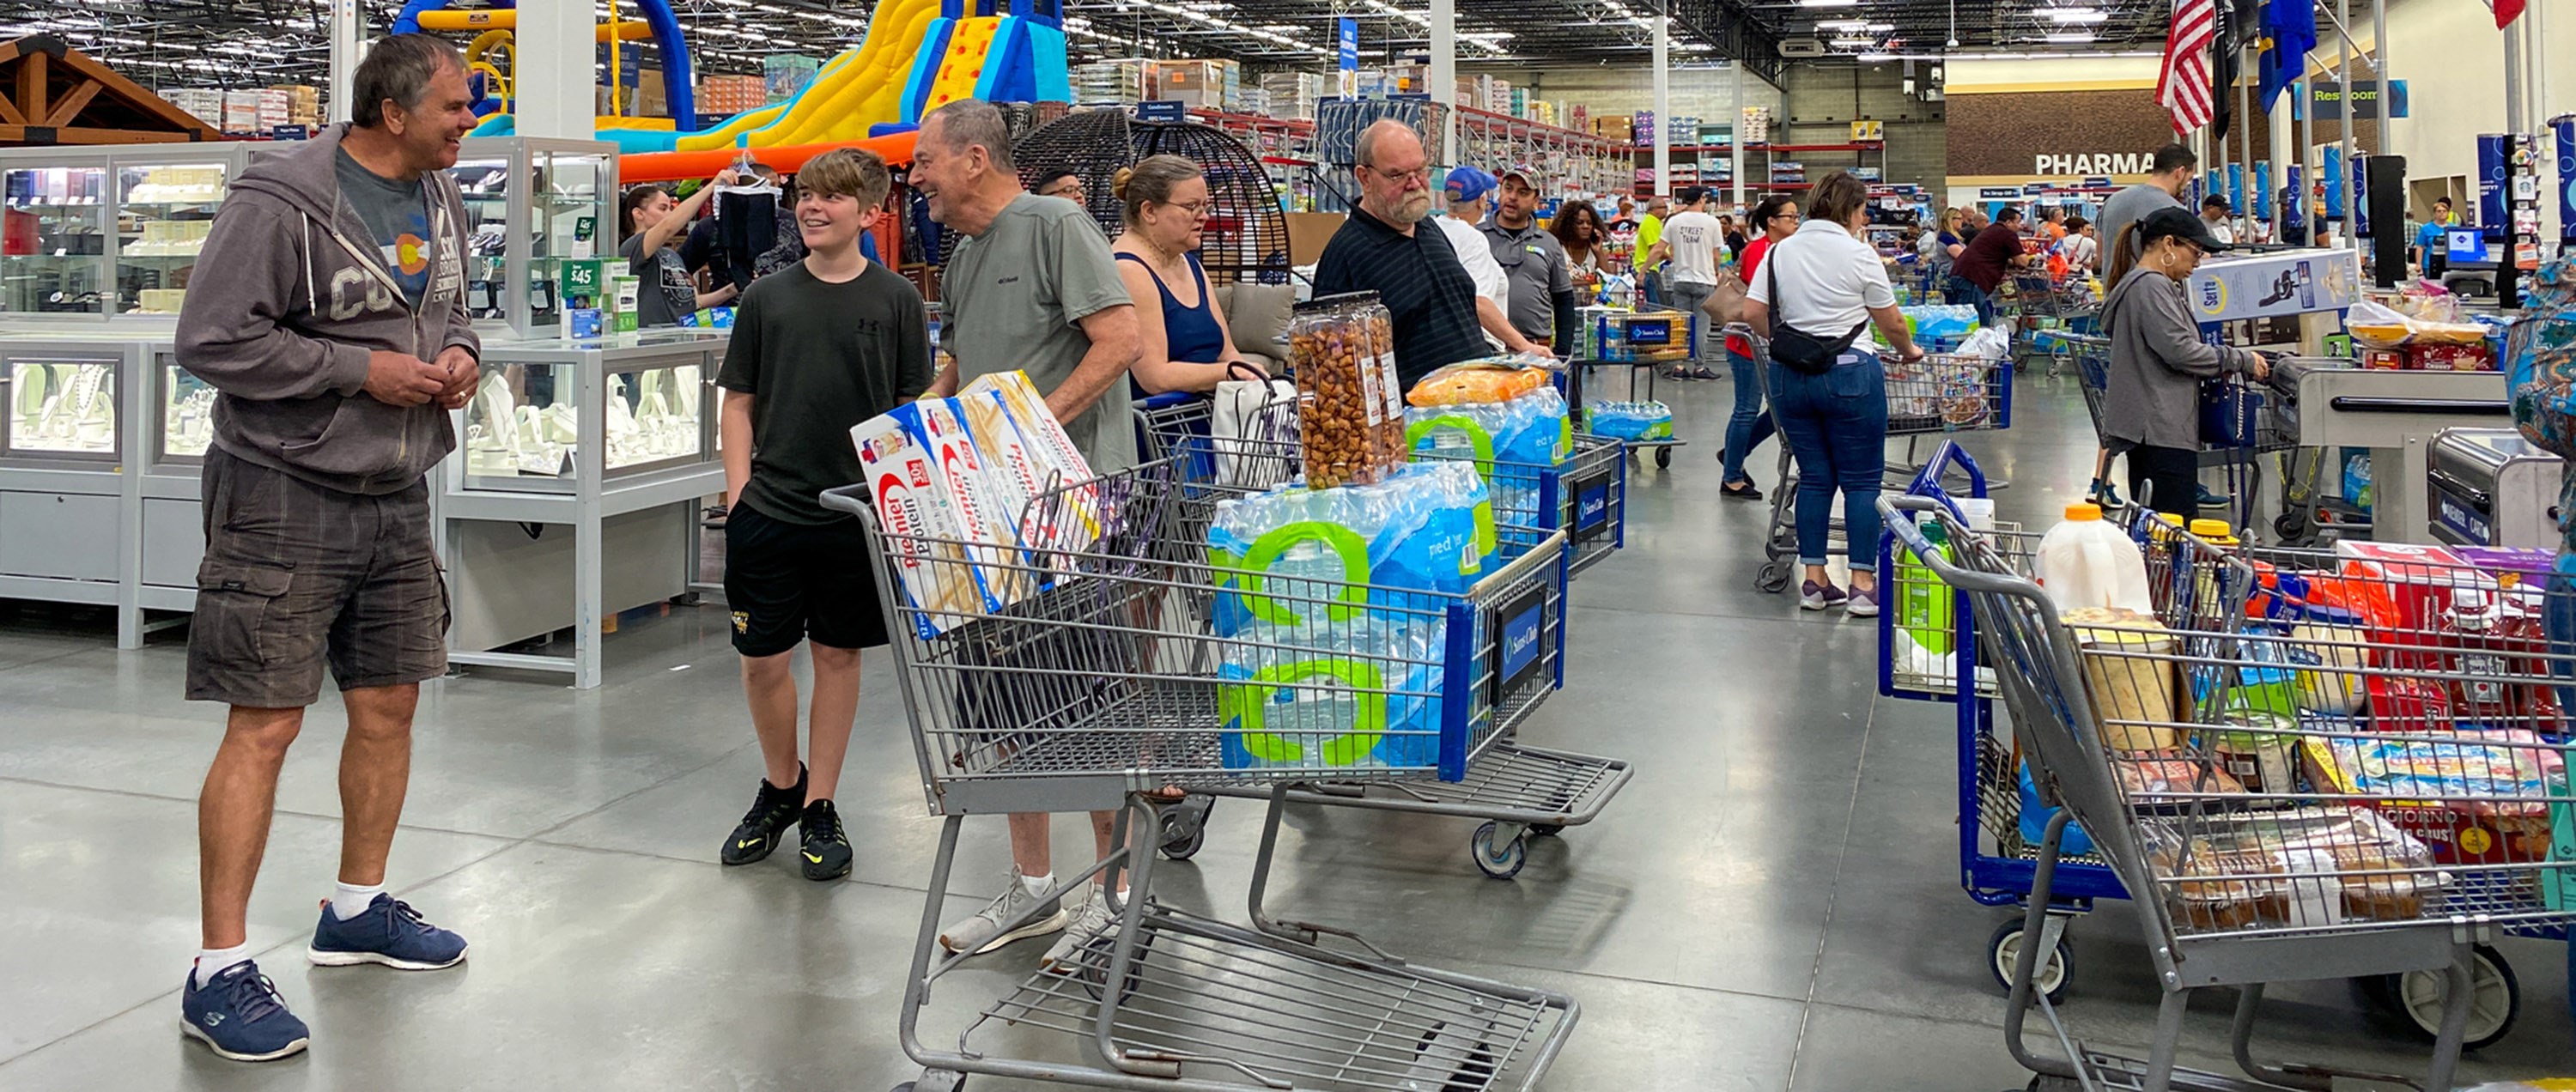 Customers standing in long lines waiting to check out their groceries at a Sams Club in Orlando, Florida due to the hoarding of essential products. Photo: Joni Hanebutt/Dreamstime.com